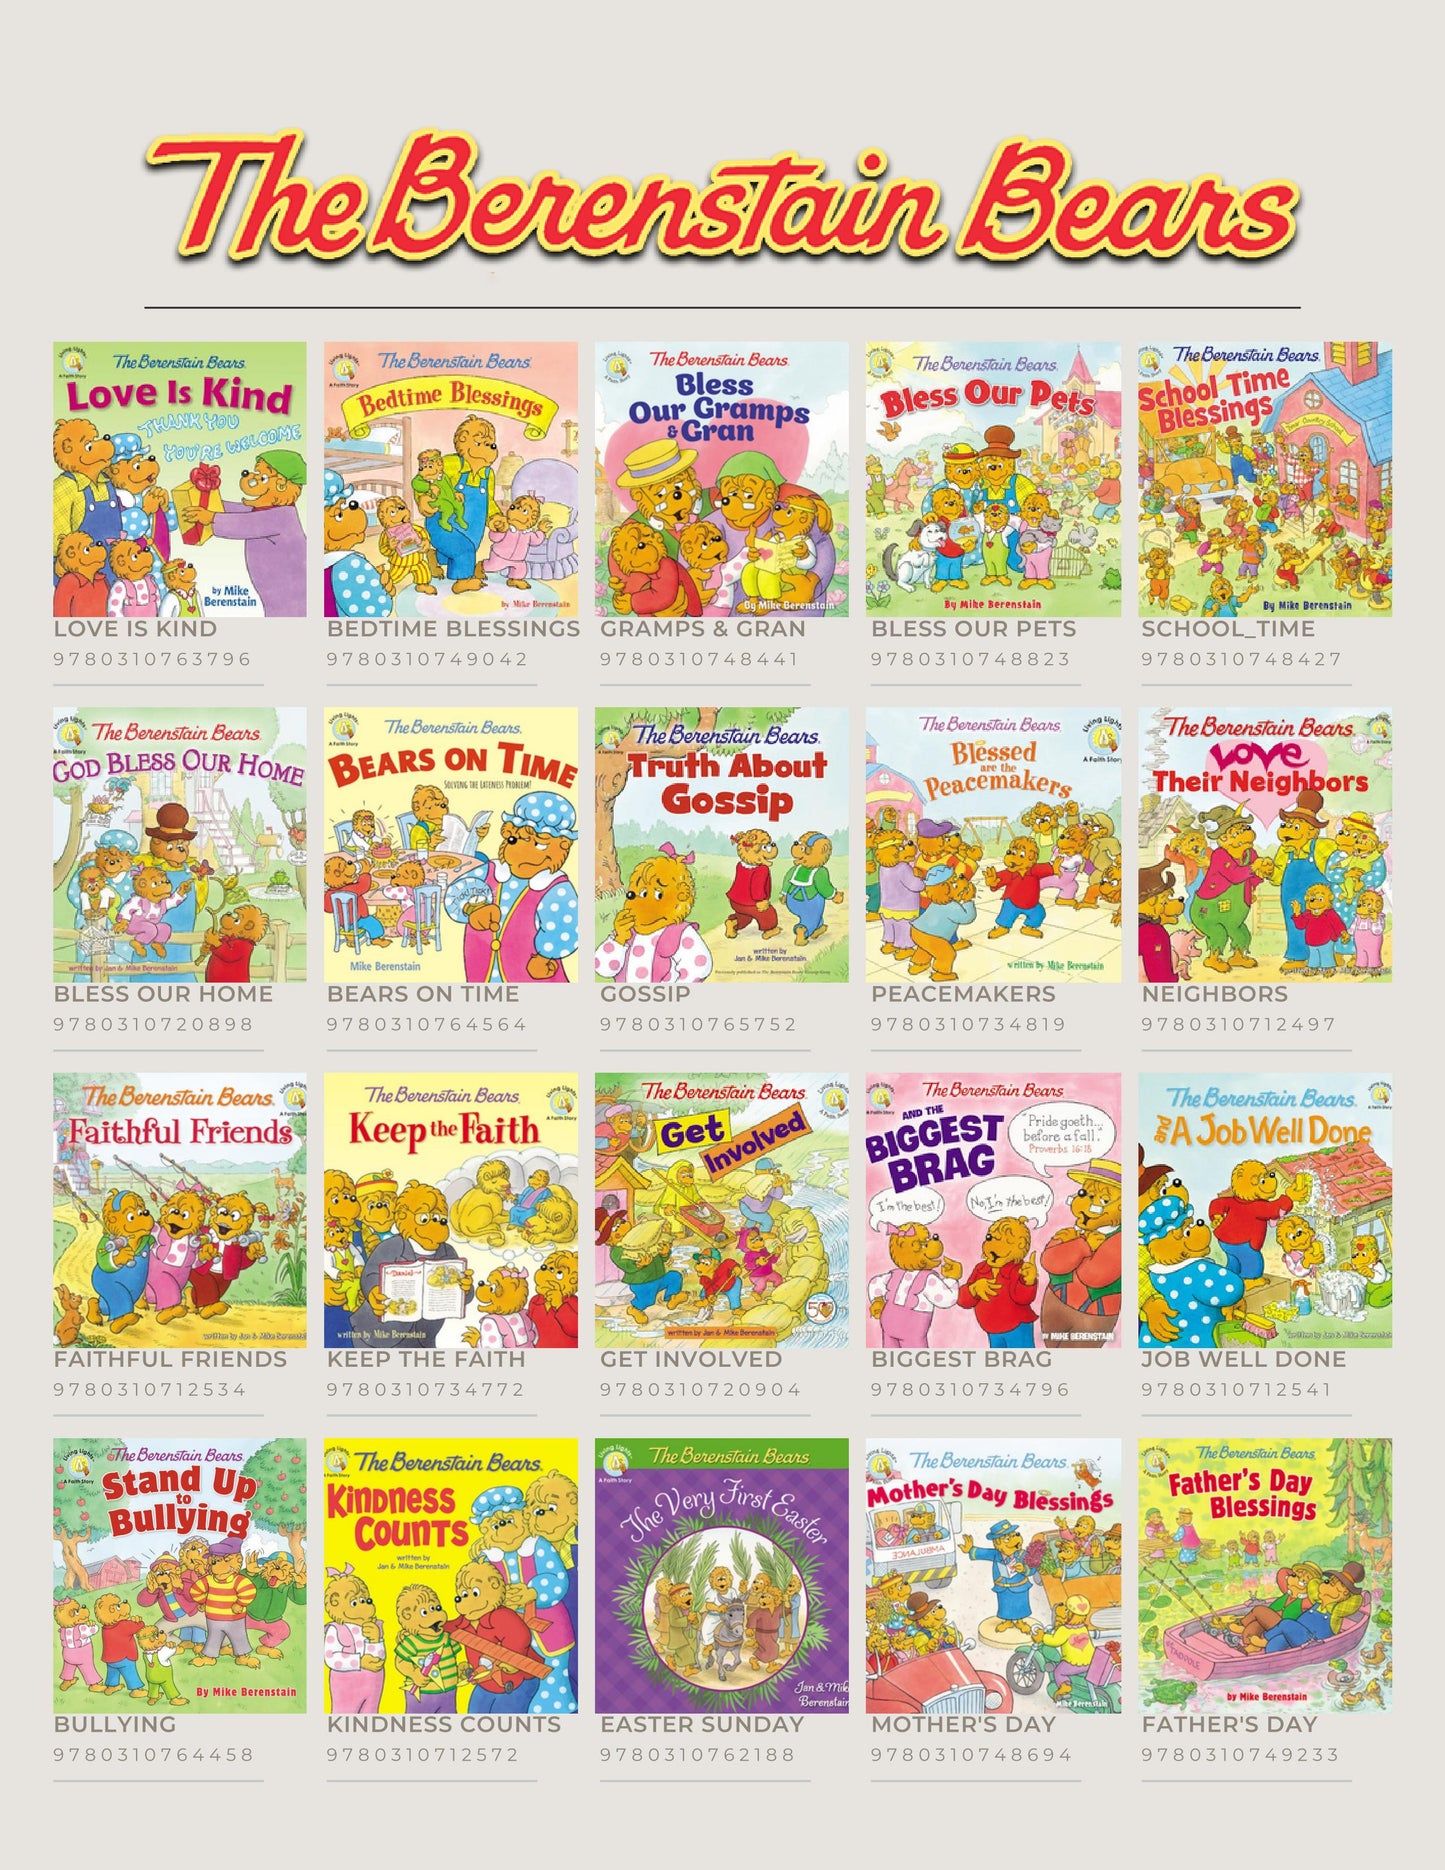 Give Thanks (Berenstain Bears)